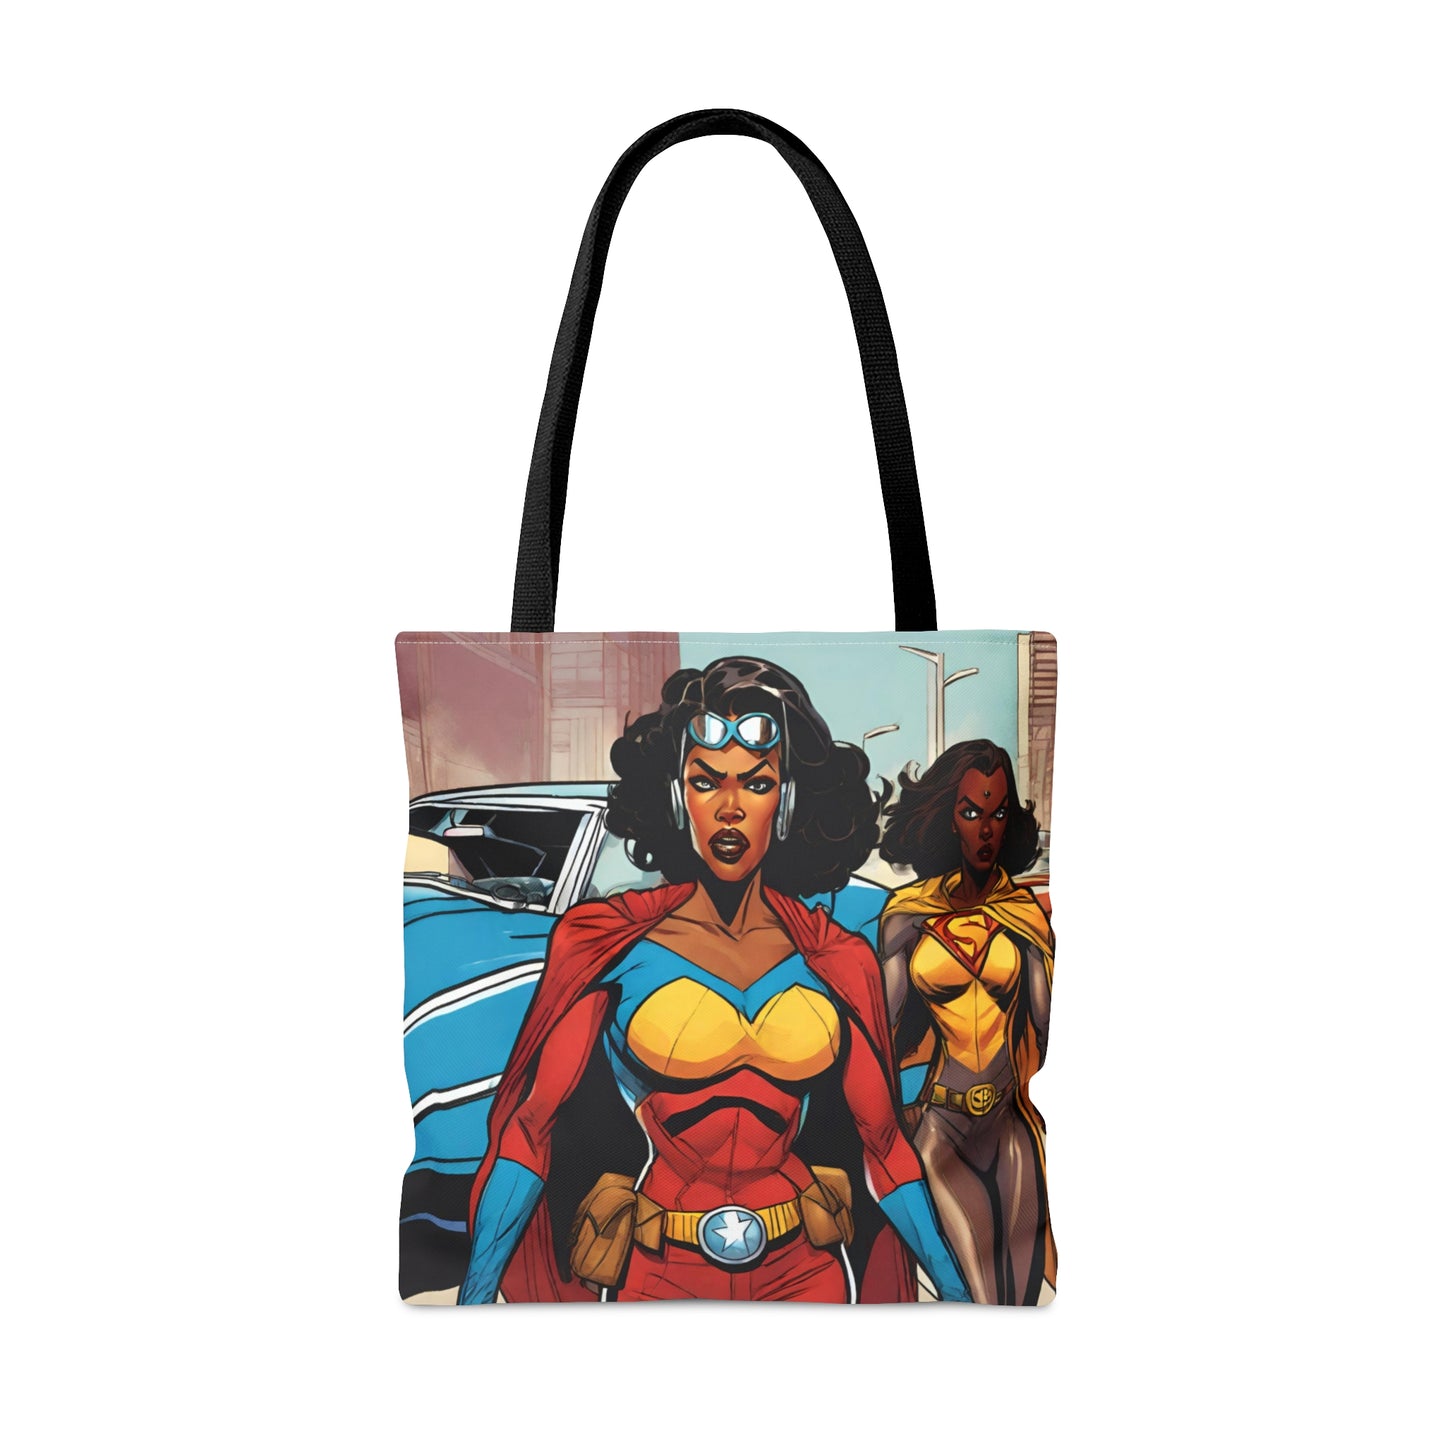 “To The Bag!”: Issue 1 Tote